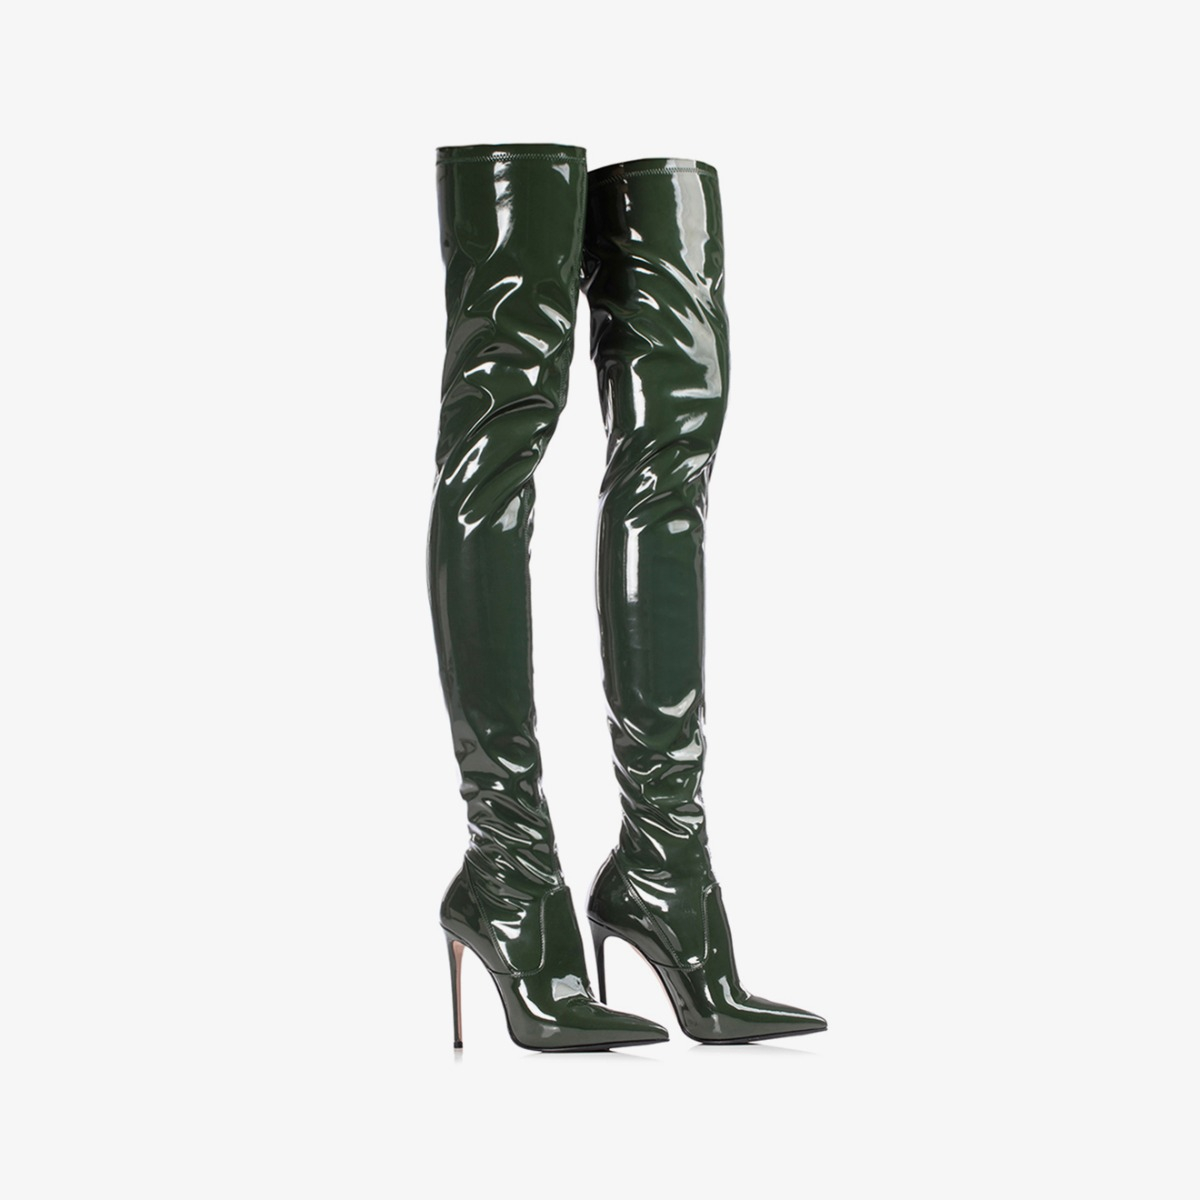 EVA THIGH-HIGH BOOT 120 mm - Le Silla official outlet